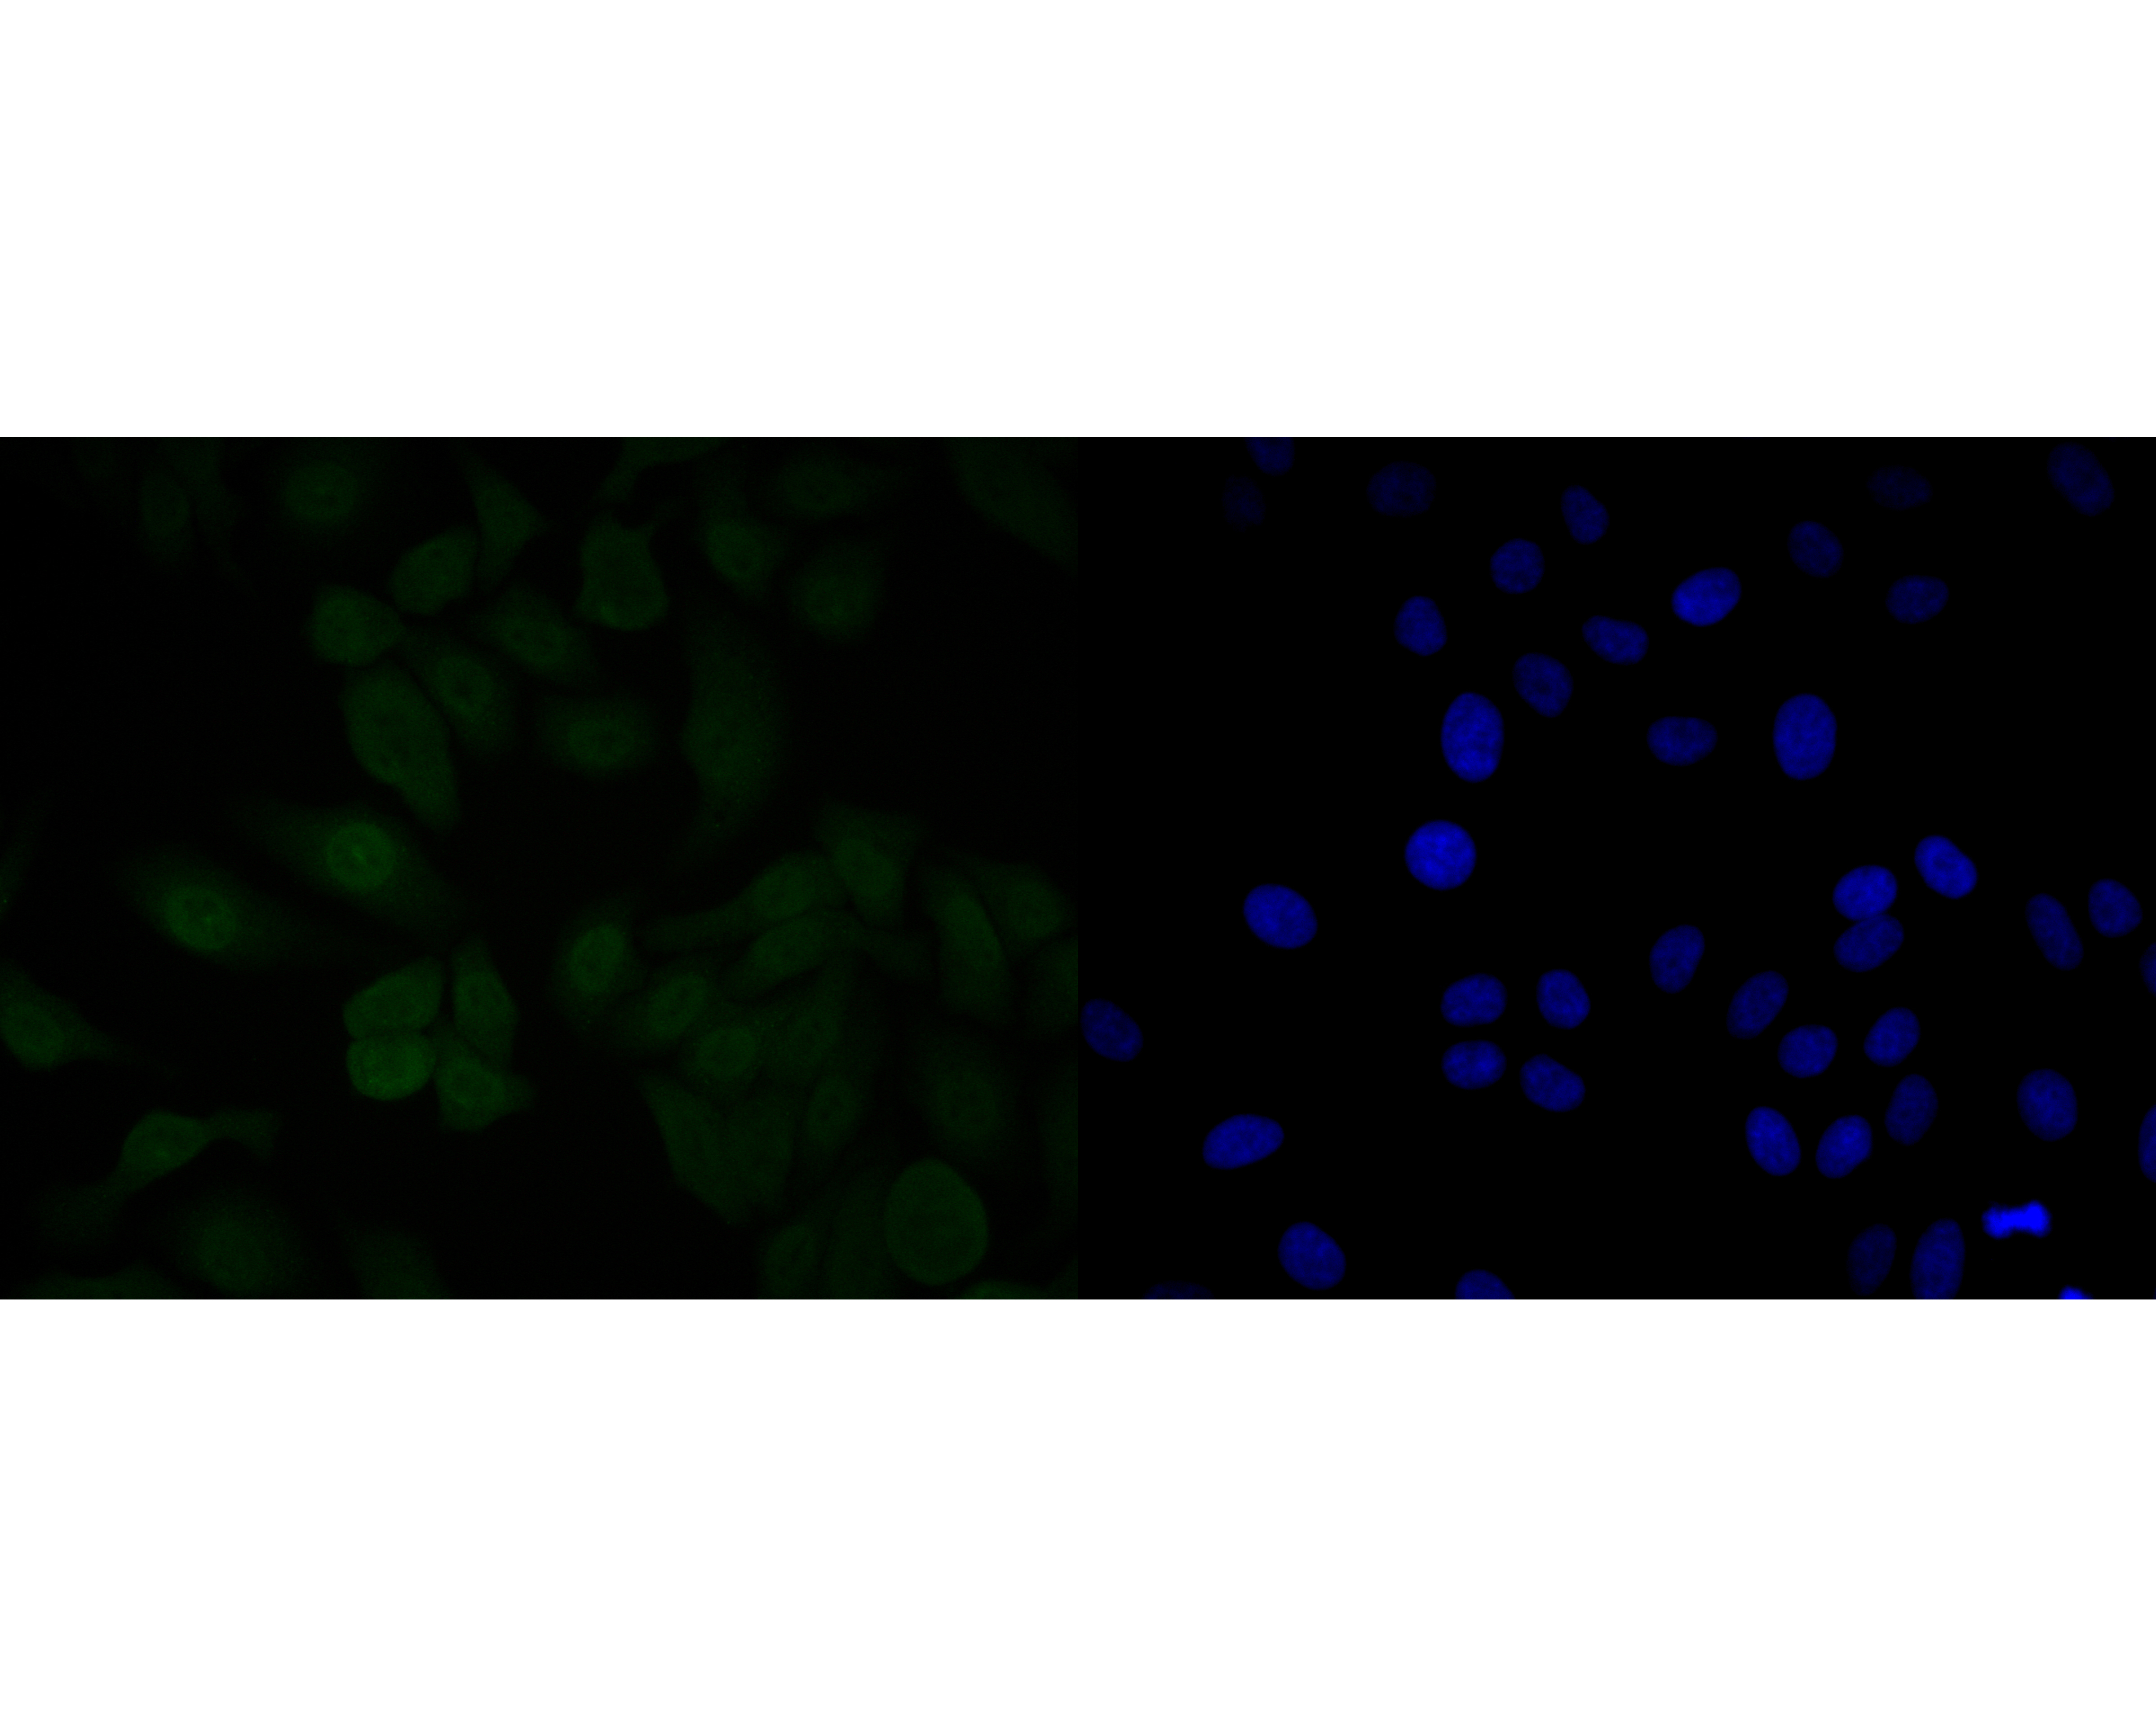 ICC staining of MDM2 in HepG2 cells (green). Formalin fixed cells were permeabilized with 0.1% Triton X-100 in TBS for 10 minutes at room temperature and blocked with 1% Blocker BSA for 15 minutes at room temperature. Cells were probed with the primary antibody (ER1902-14, 1/200) for 1 hour at room temperature, washed with PBS. Alexa Fluor®488 Goat anti-Rabbit IgG was used as the secondary antibody at 1/1,000 dilution. The nuclear counter stain is DAPI (blue).